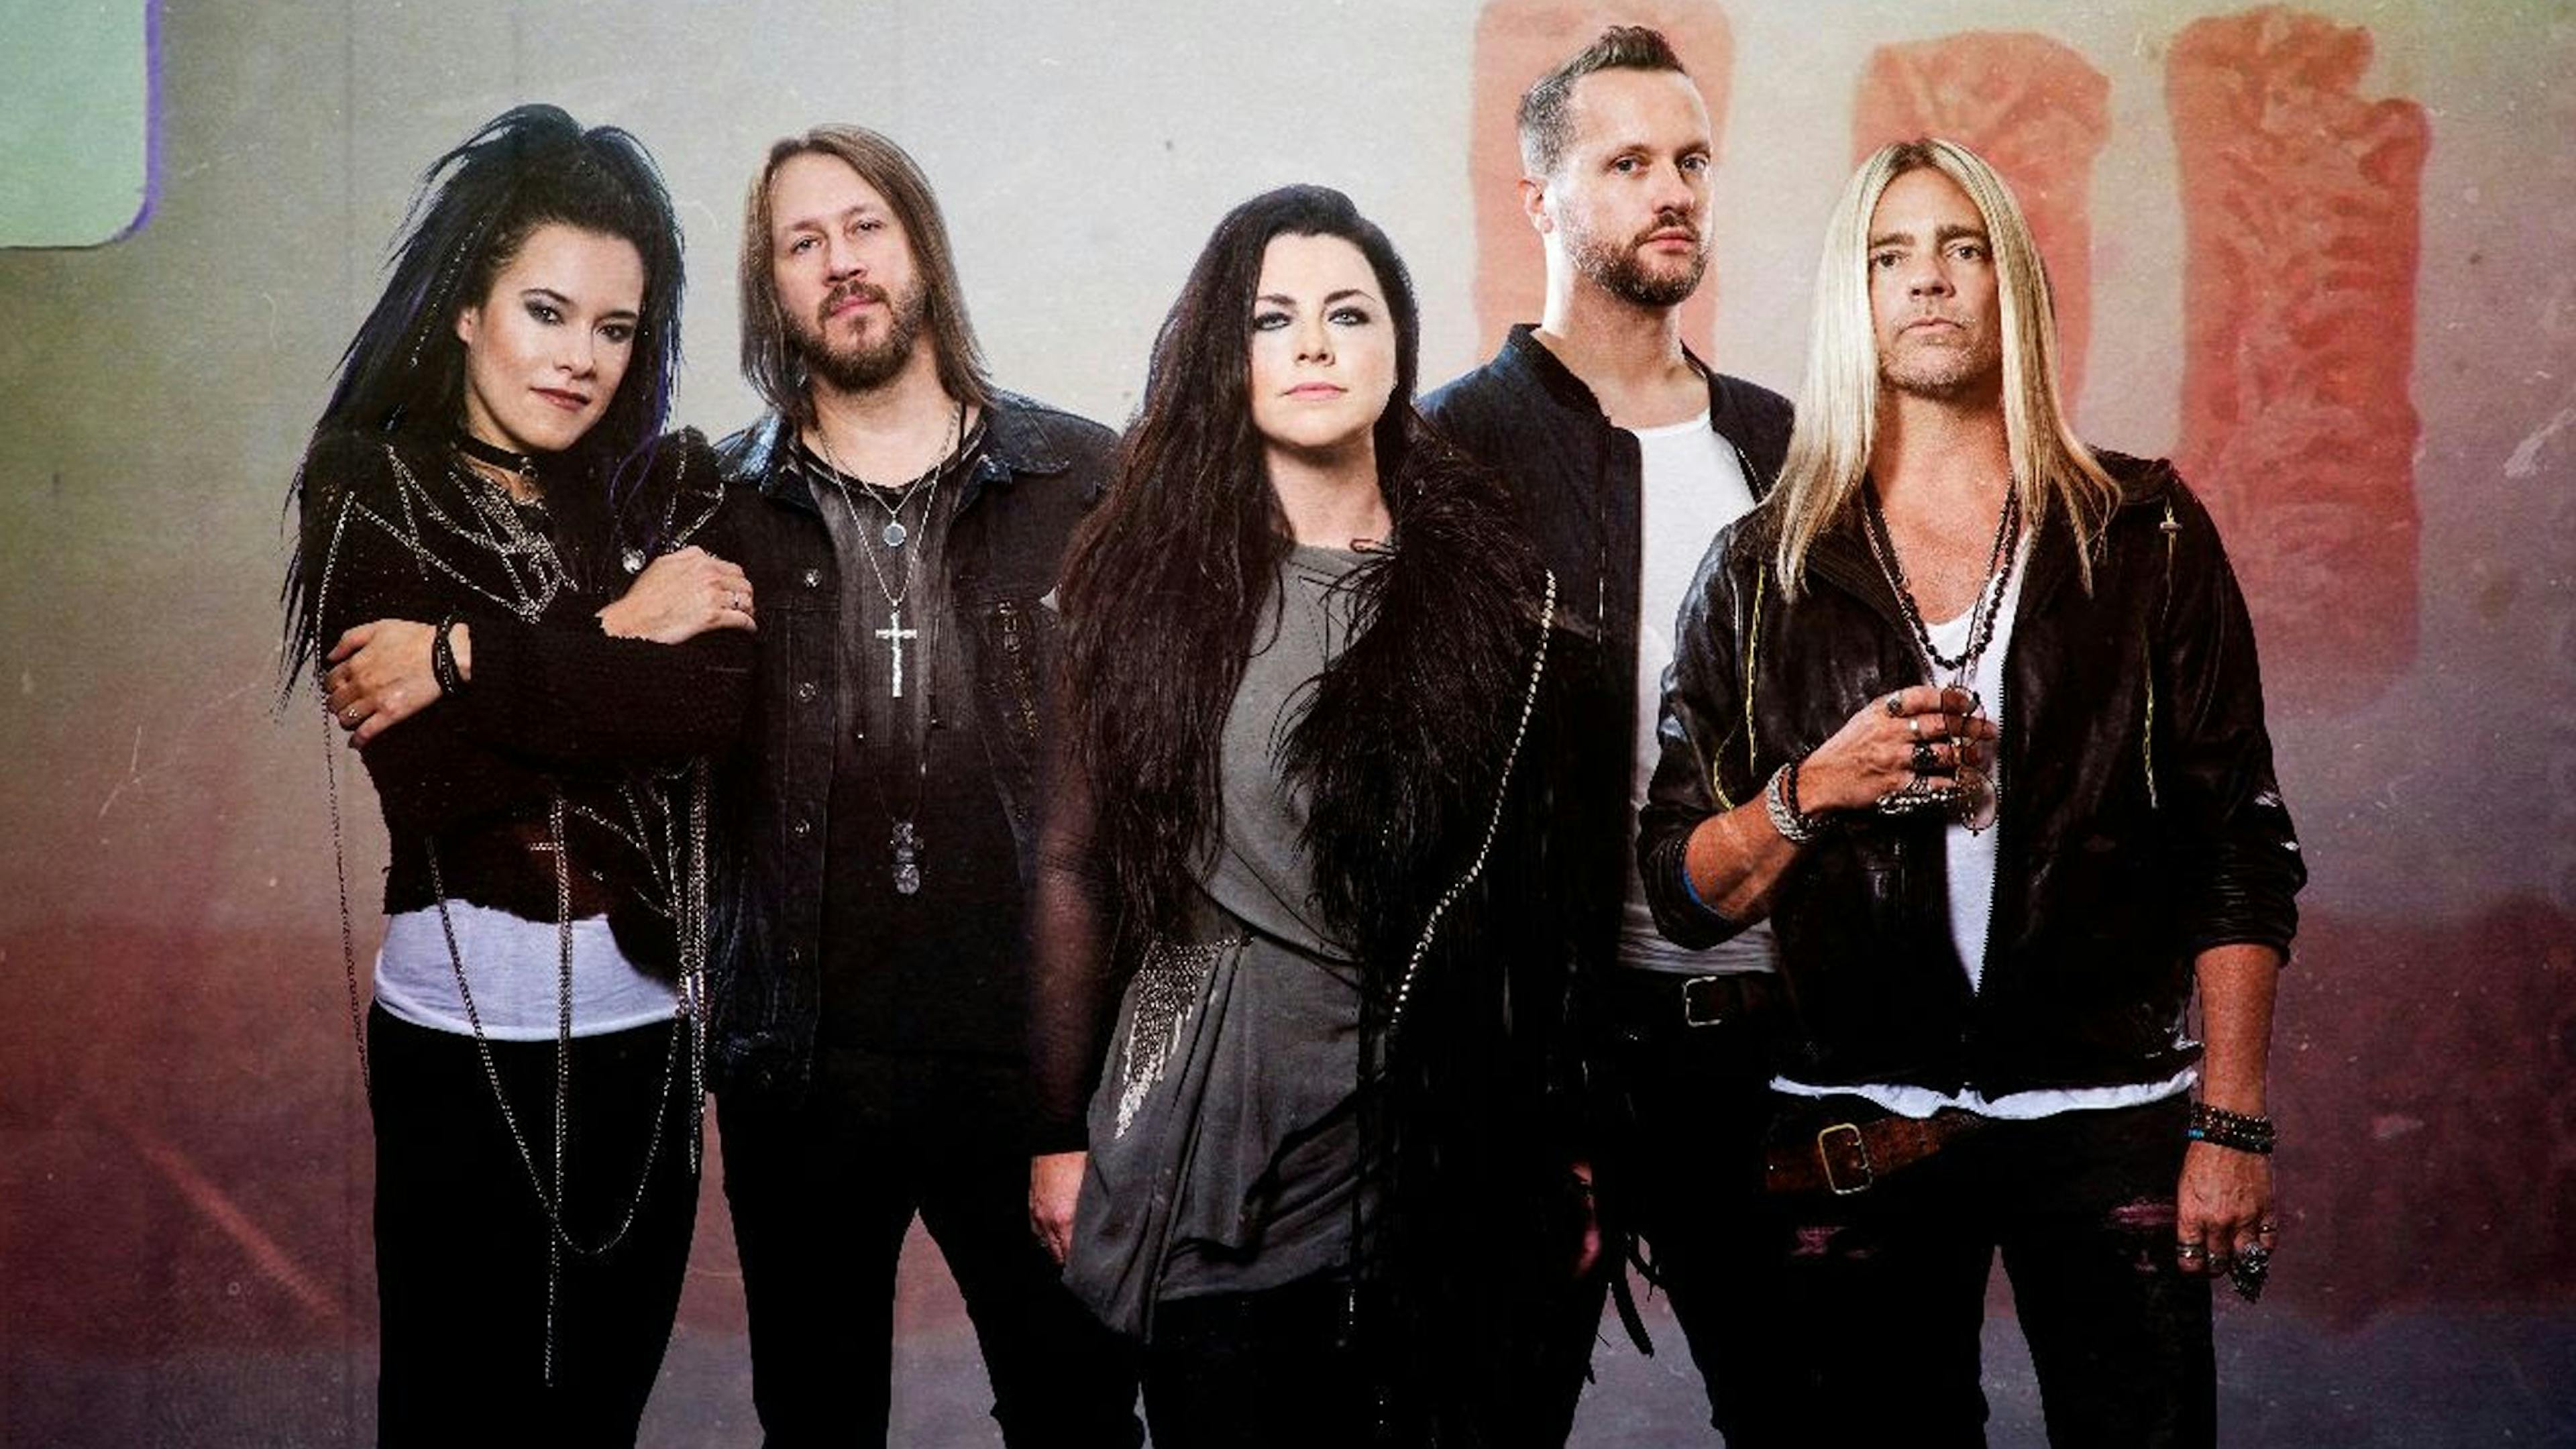 Evanescence have finally announced their new album, The Bitter Truth